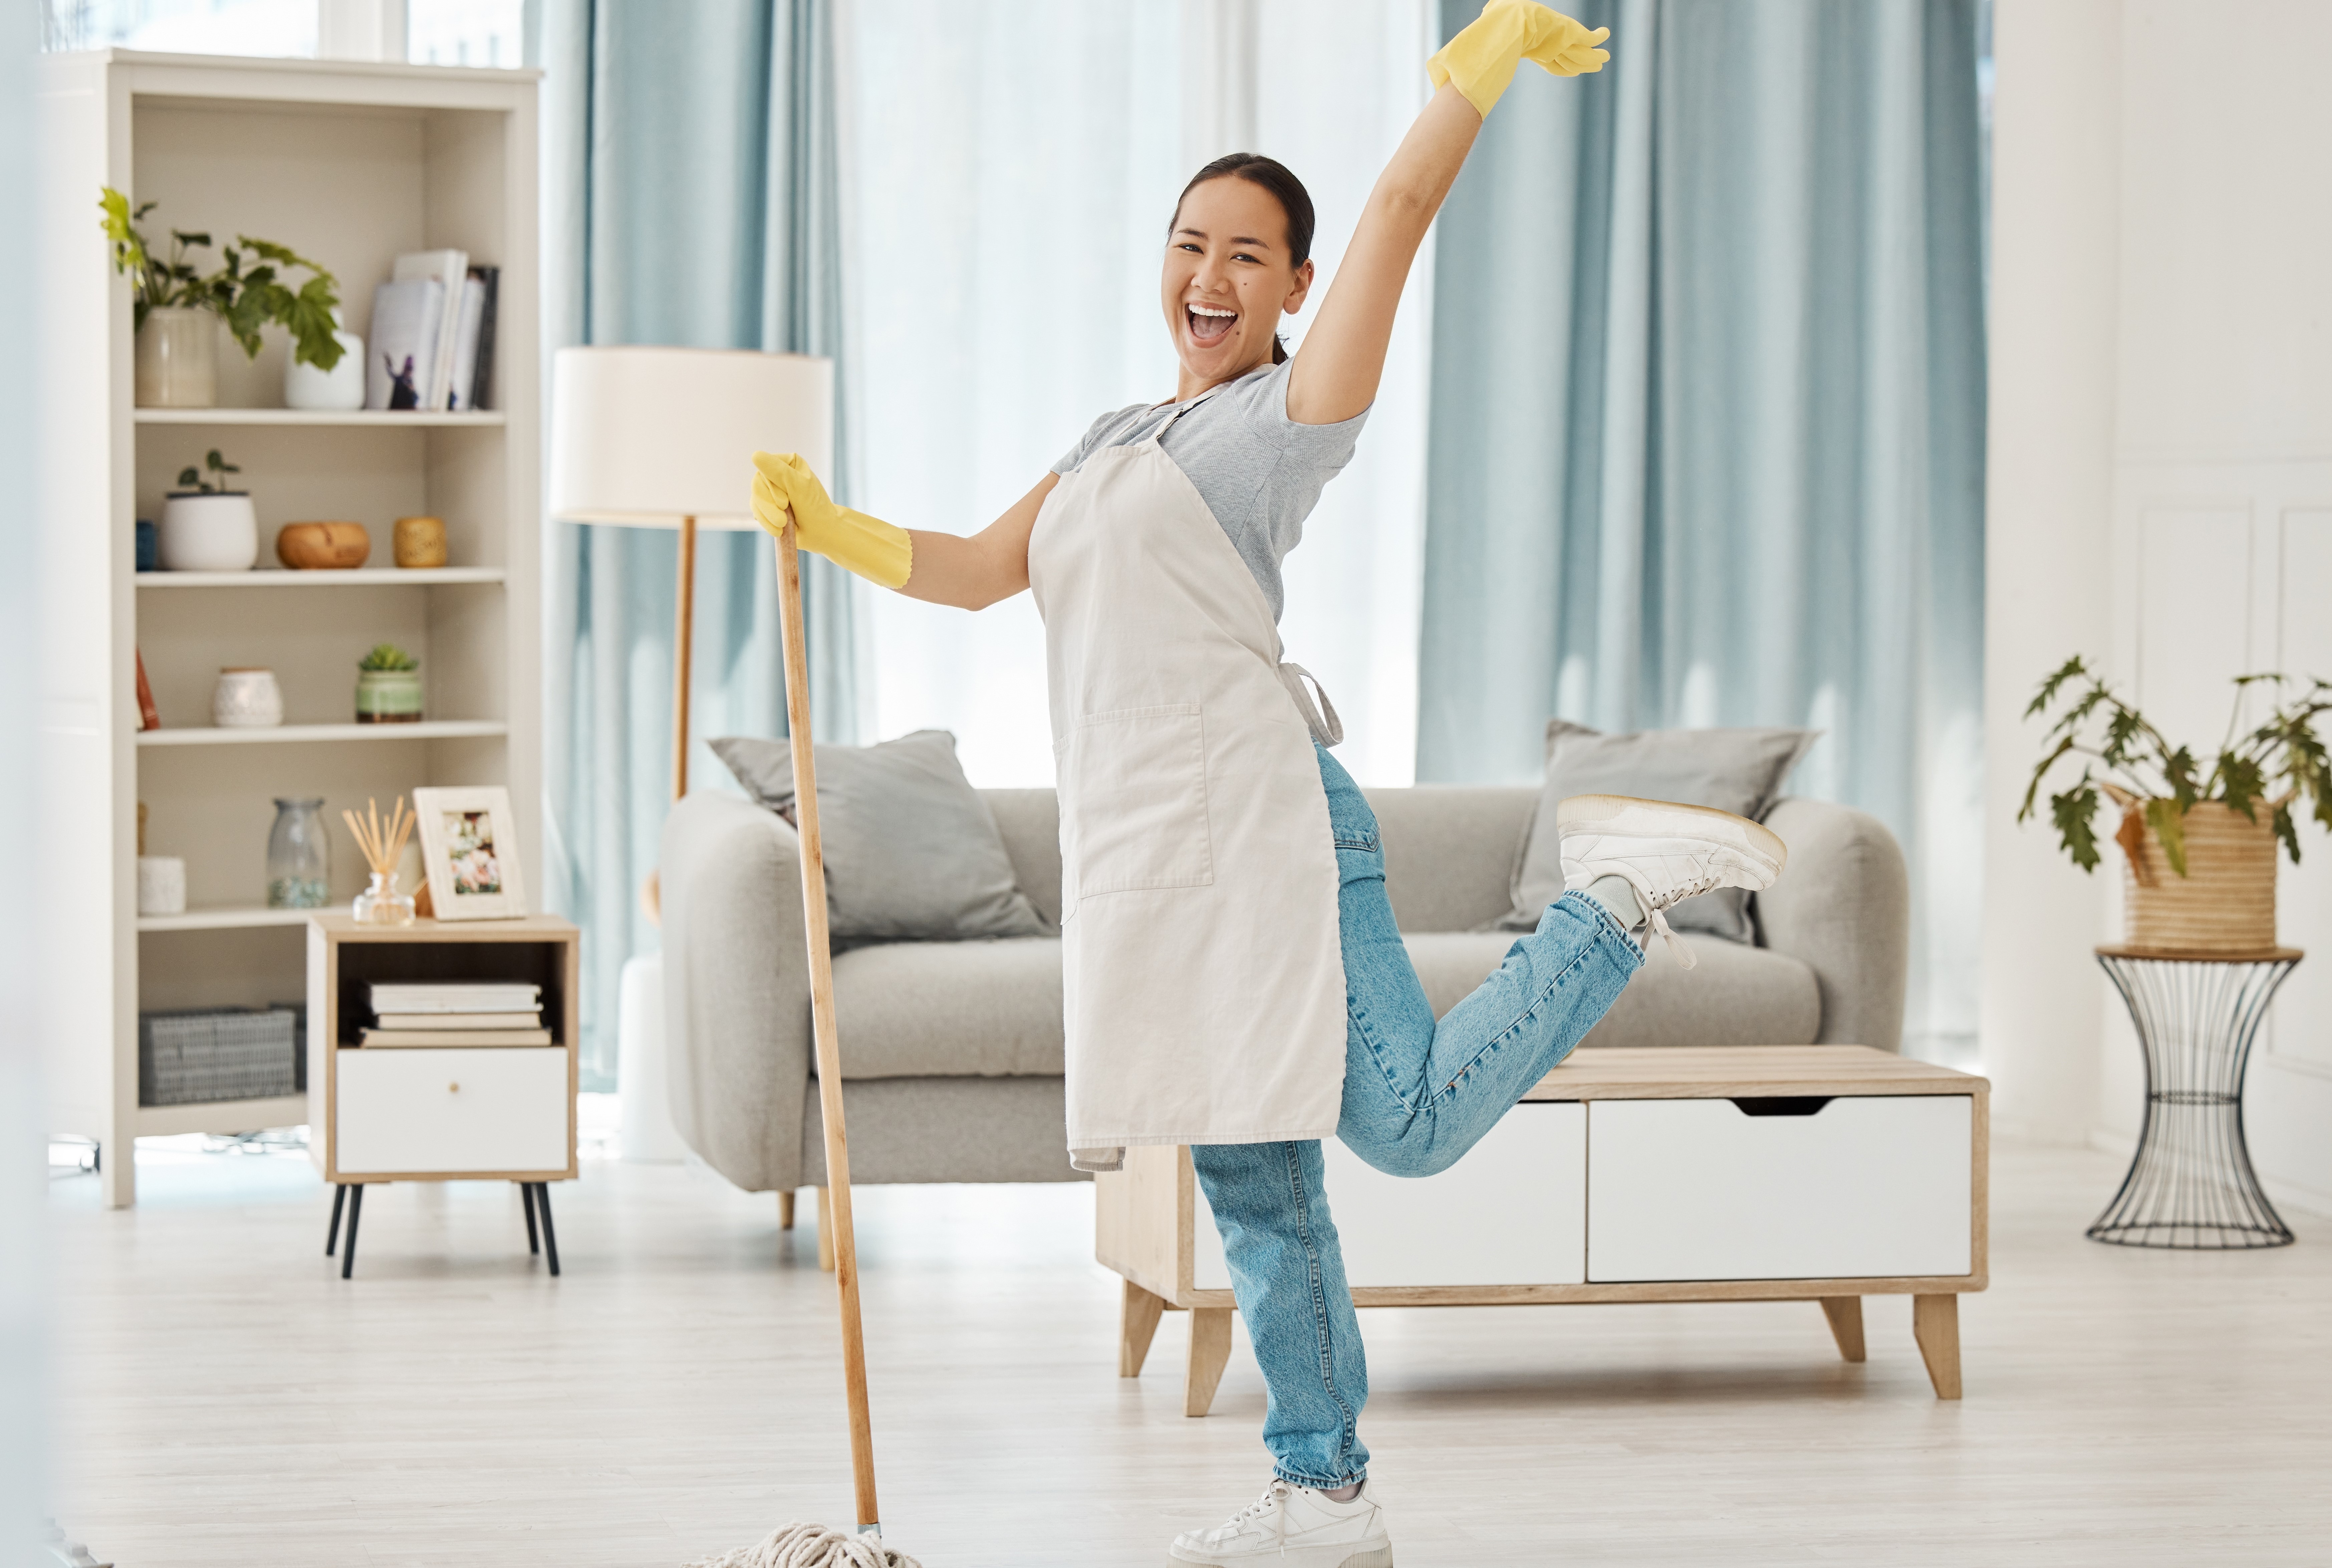 Understanding Your Maid's Needs in a New Environment